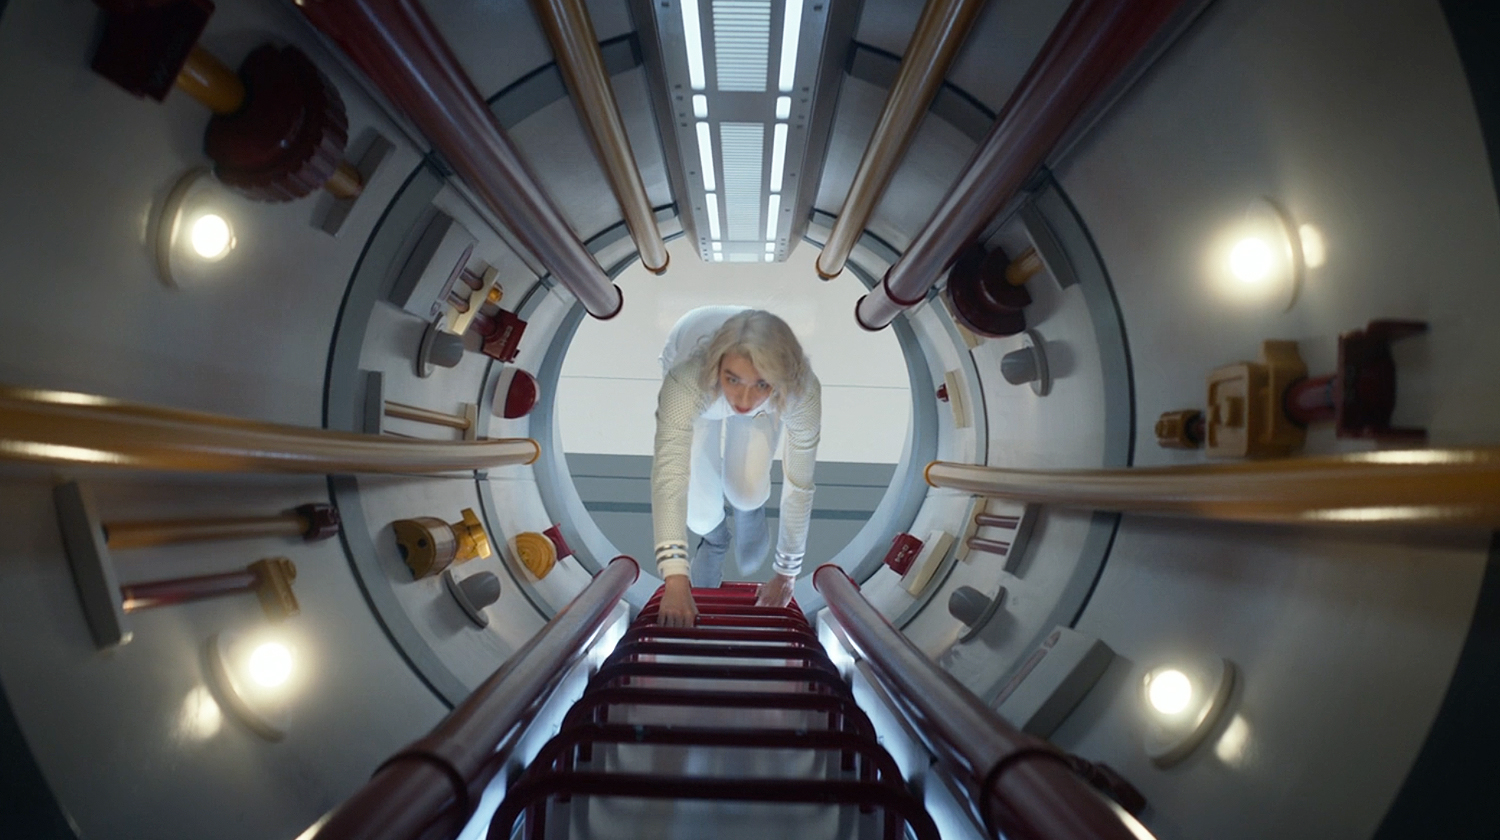 Nurse Chapel climbs a ladder in the Jeffries Tube on the USS Enterprise.